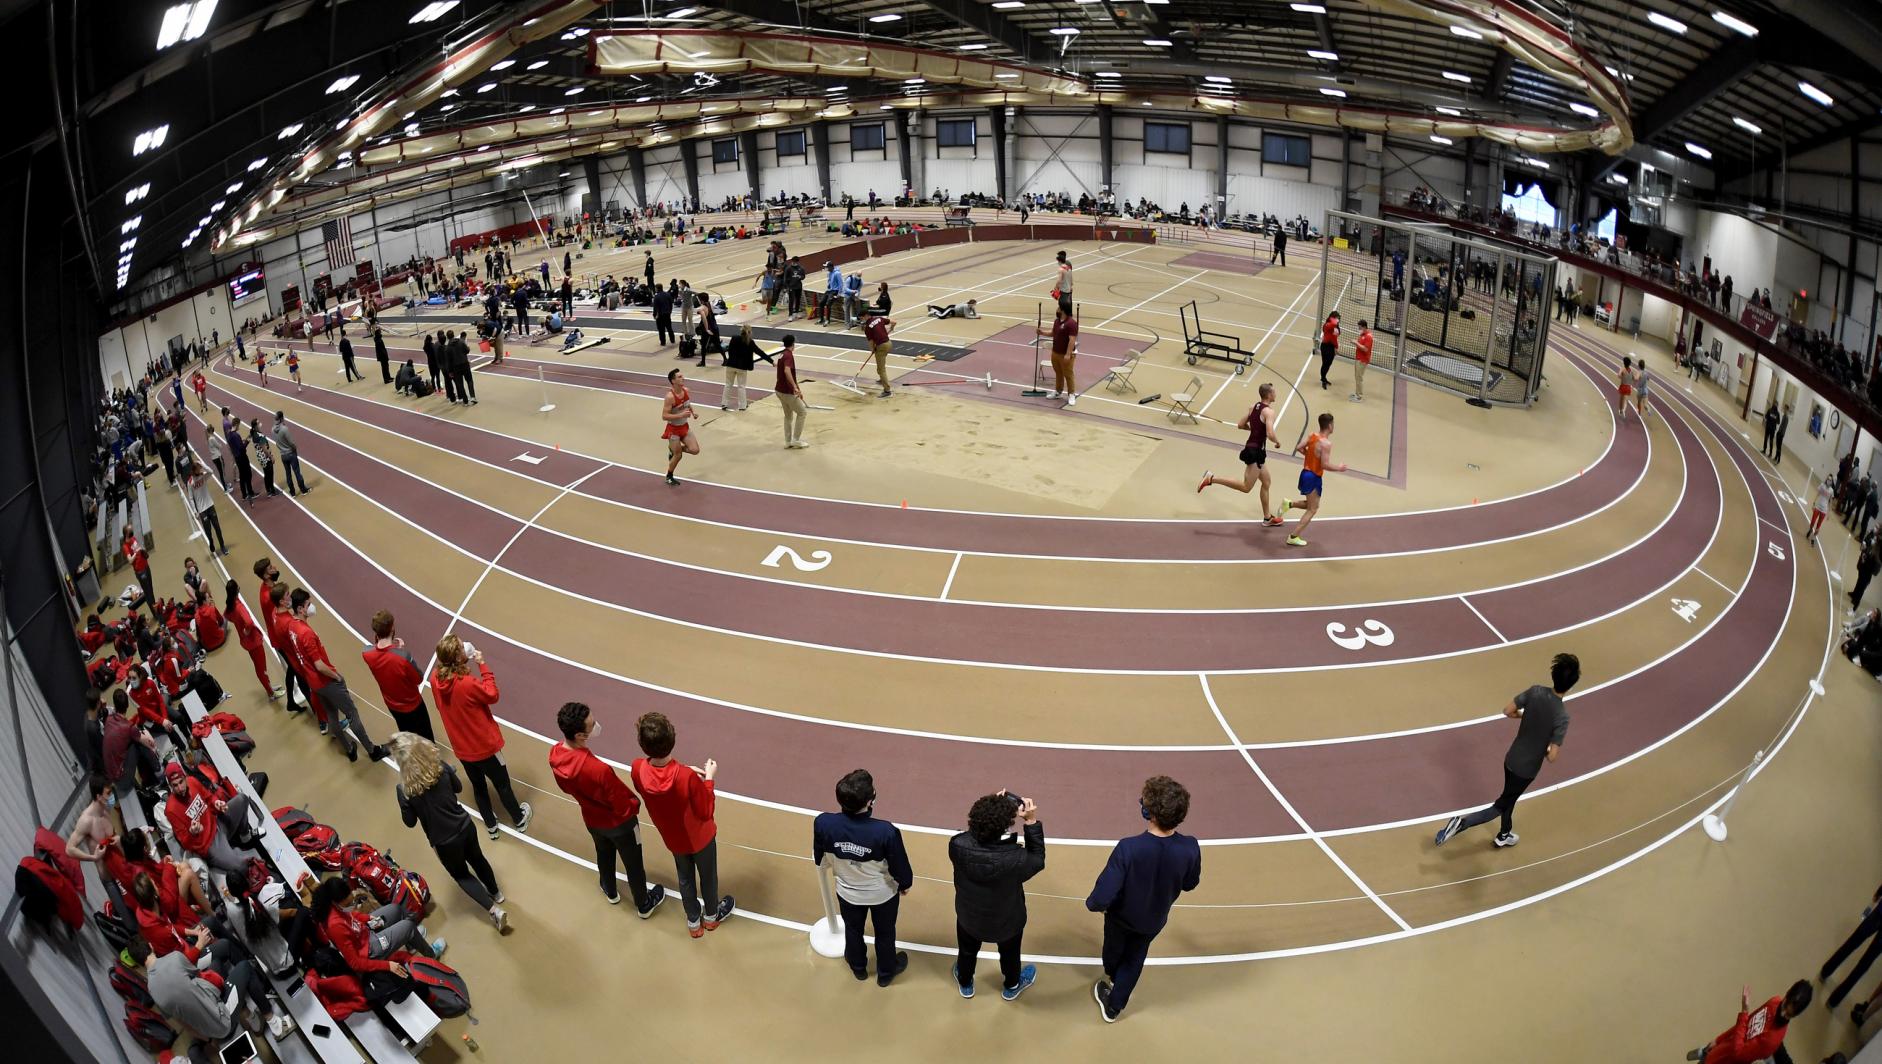 Springfield College hosts an Indoor Track and Field event inside the Field House on Saturday, February 19, 2022.